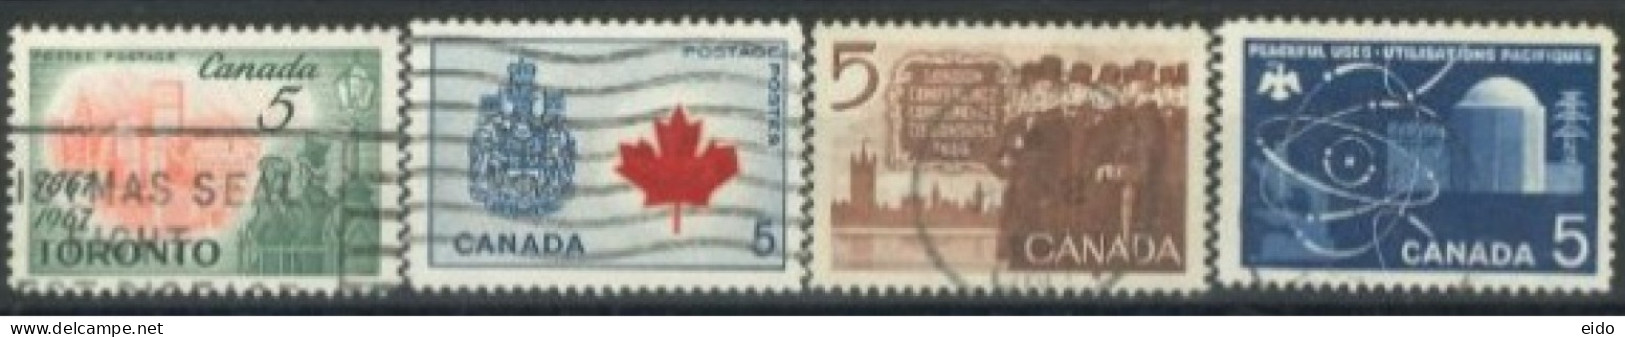 CANADA - 1964/67, STAMPS SET OF 4, USED. - Gebraucht